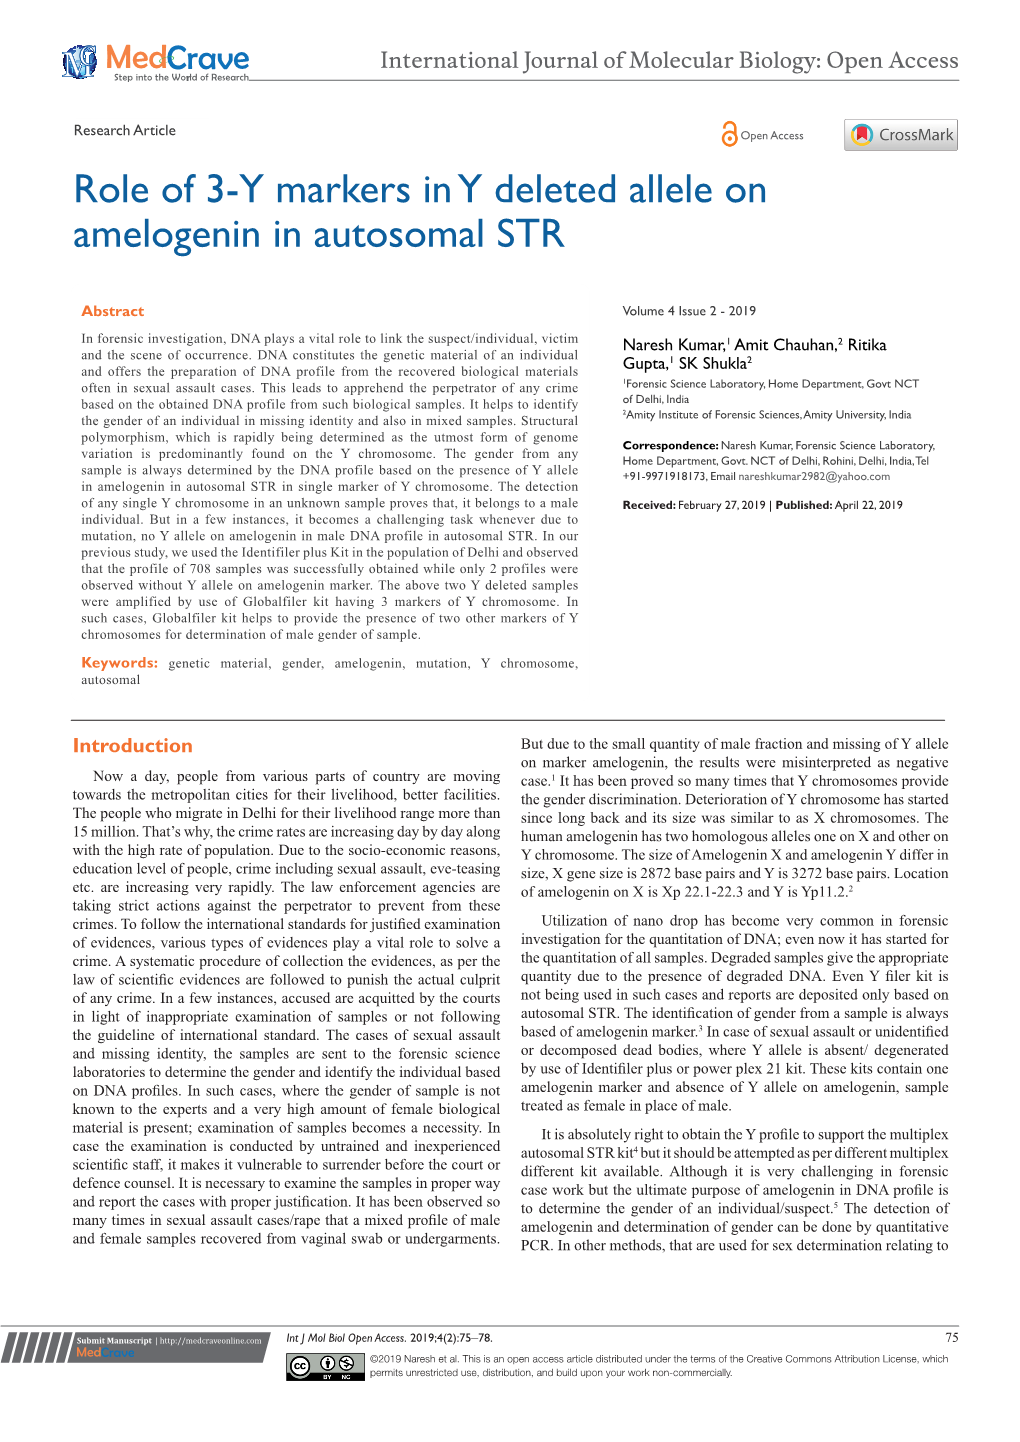 Role of 3-Y Markers in Y Deleted Allele on Amelogenin in Autosomal STR